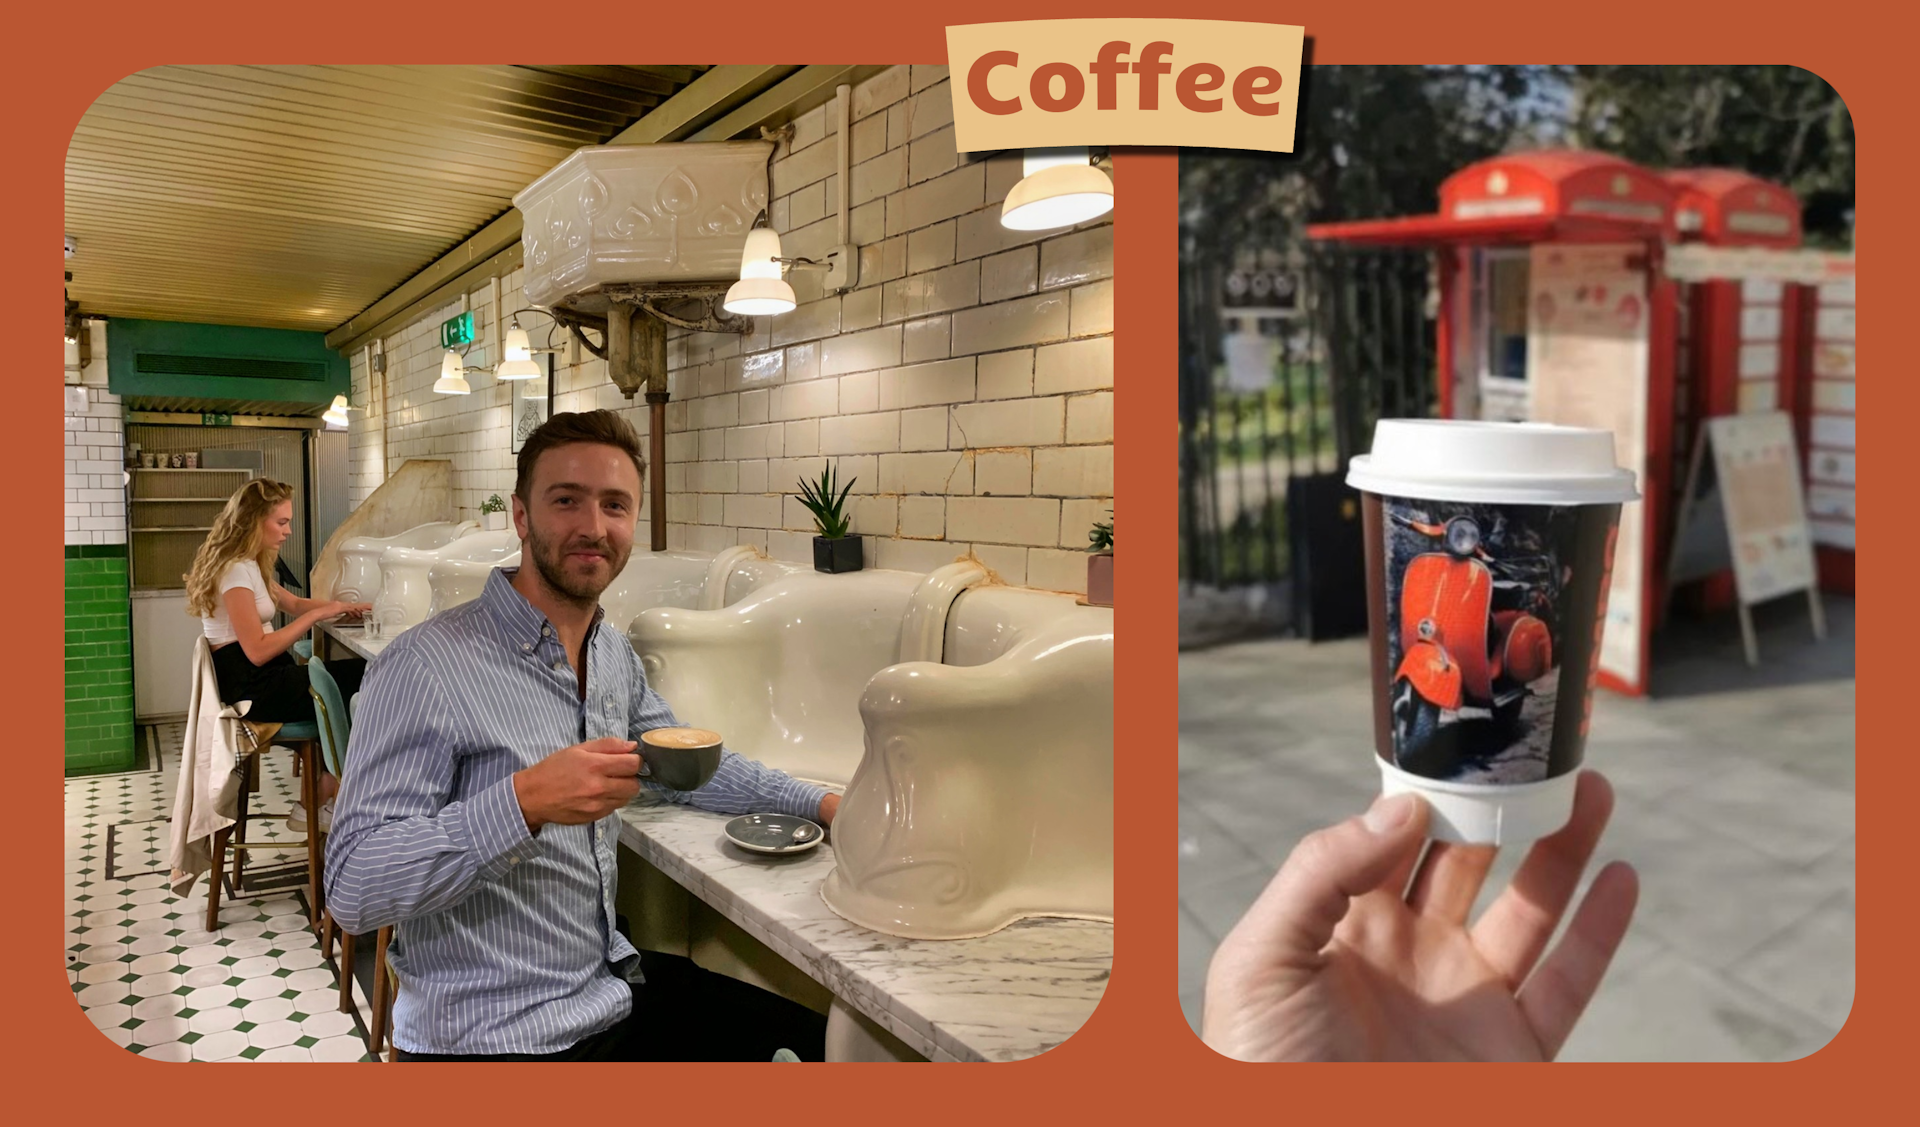 L: Man sitting with coffee and a not-in-use urinal. R: A London phonebox reimagined as a coffee stand